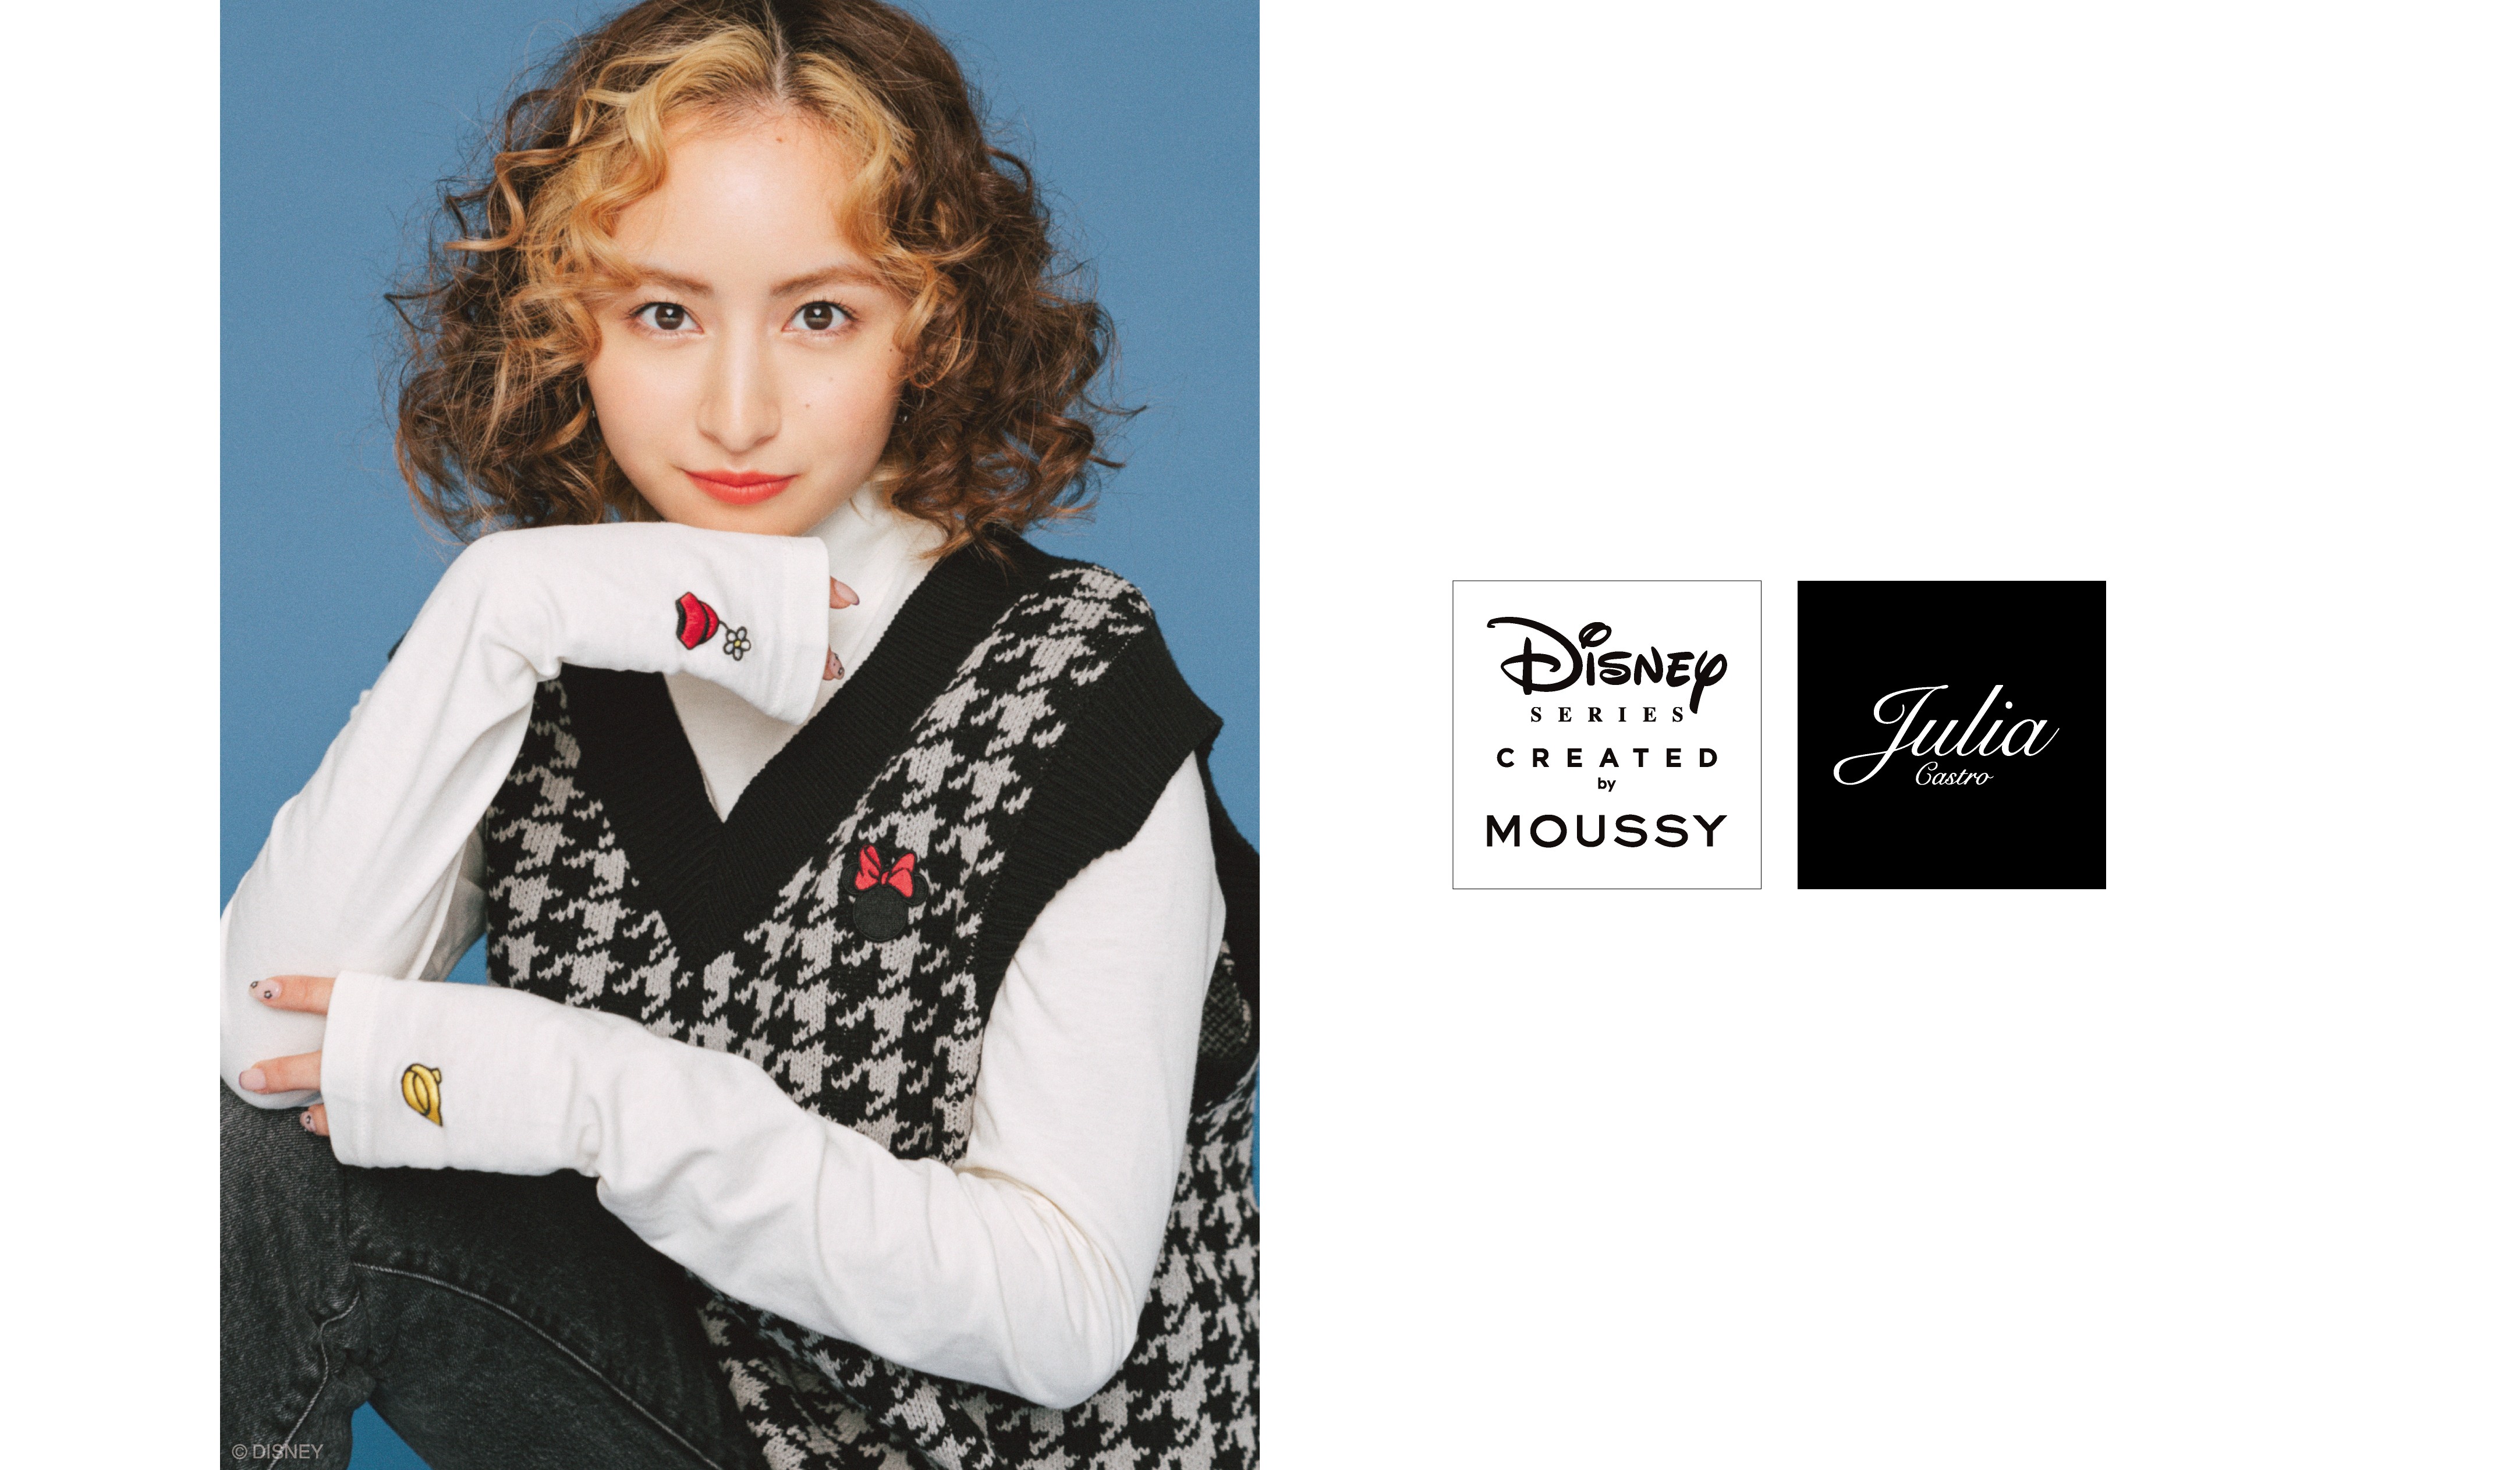 「Disney SERIES CREATED by MOUSSY」×YouTuber JULIA1